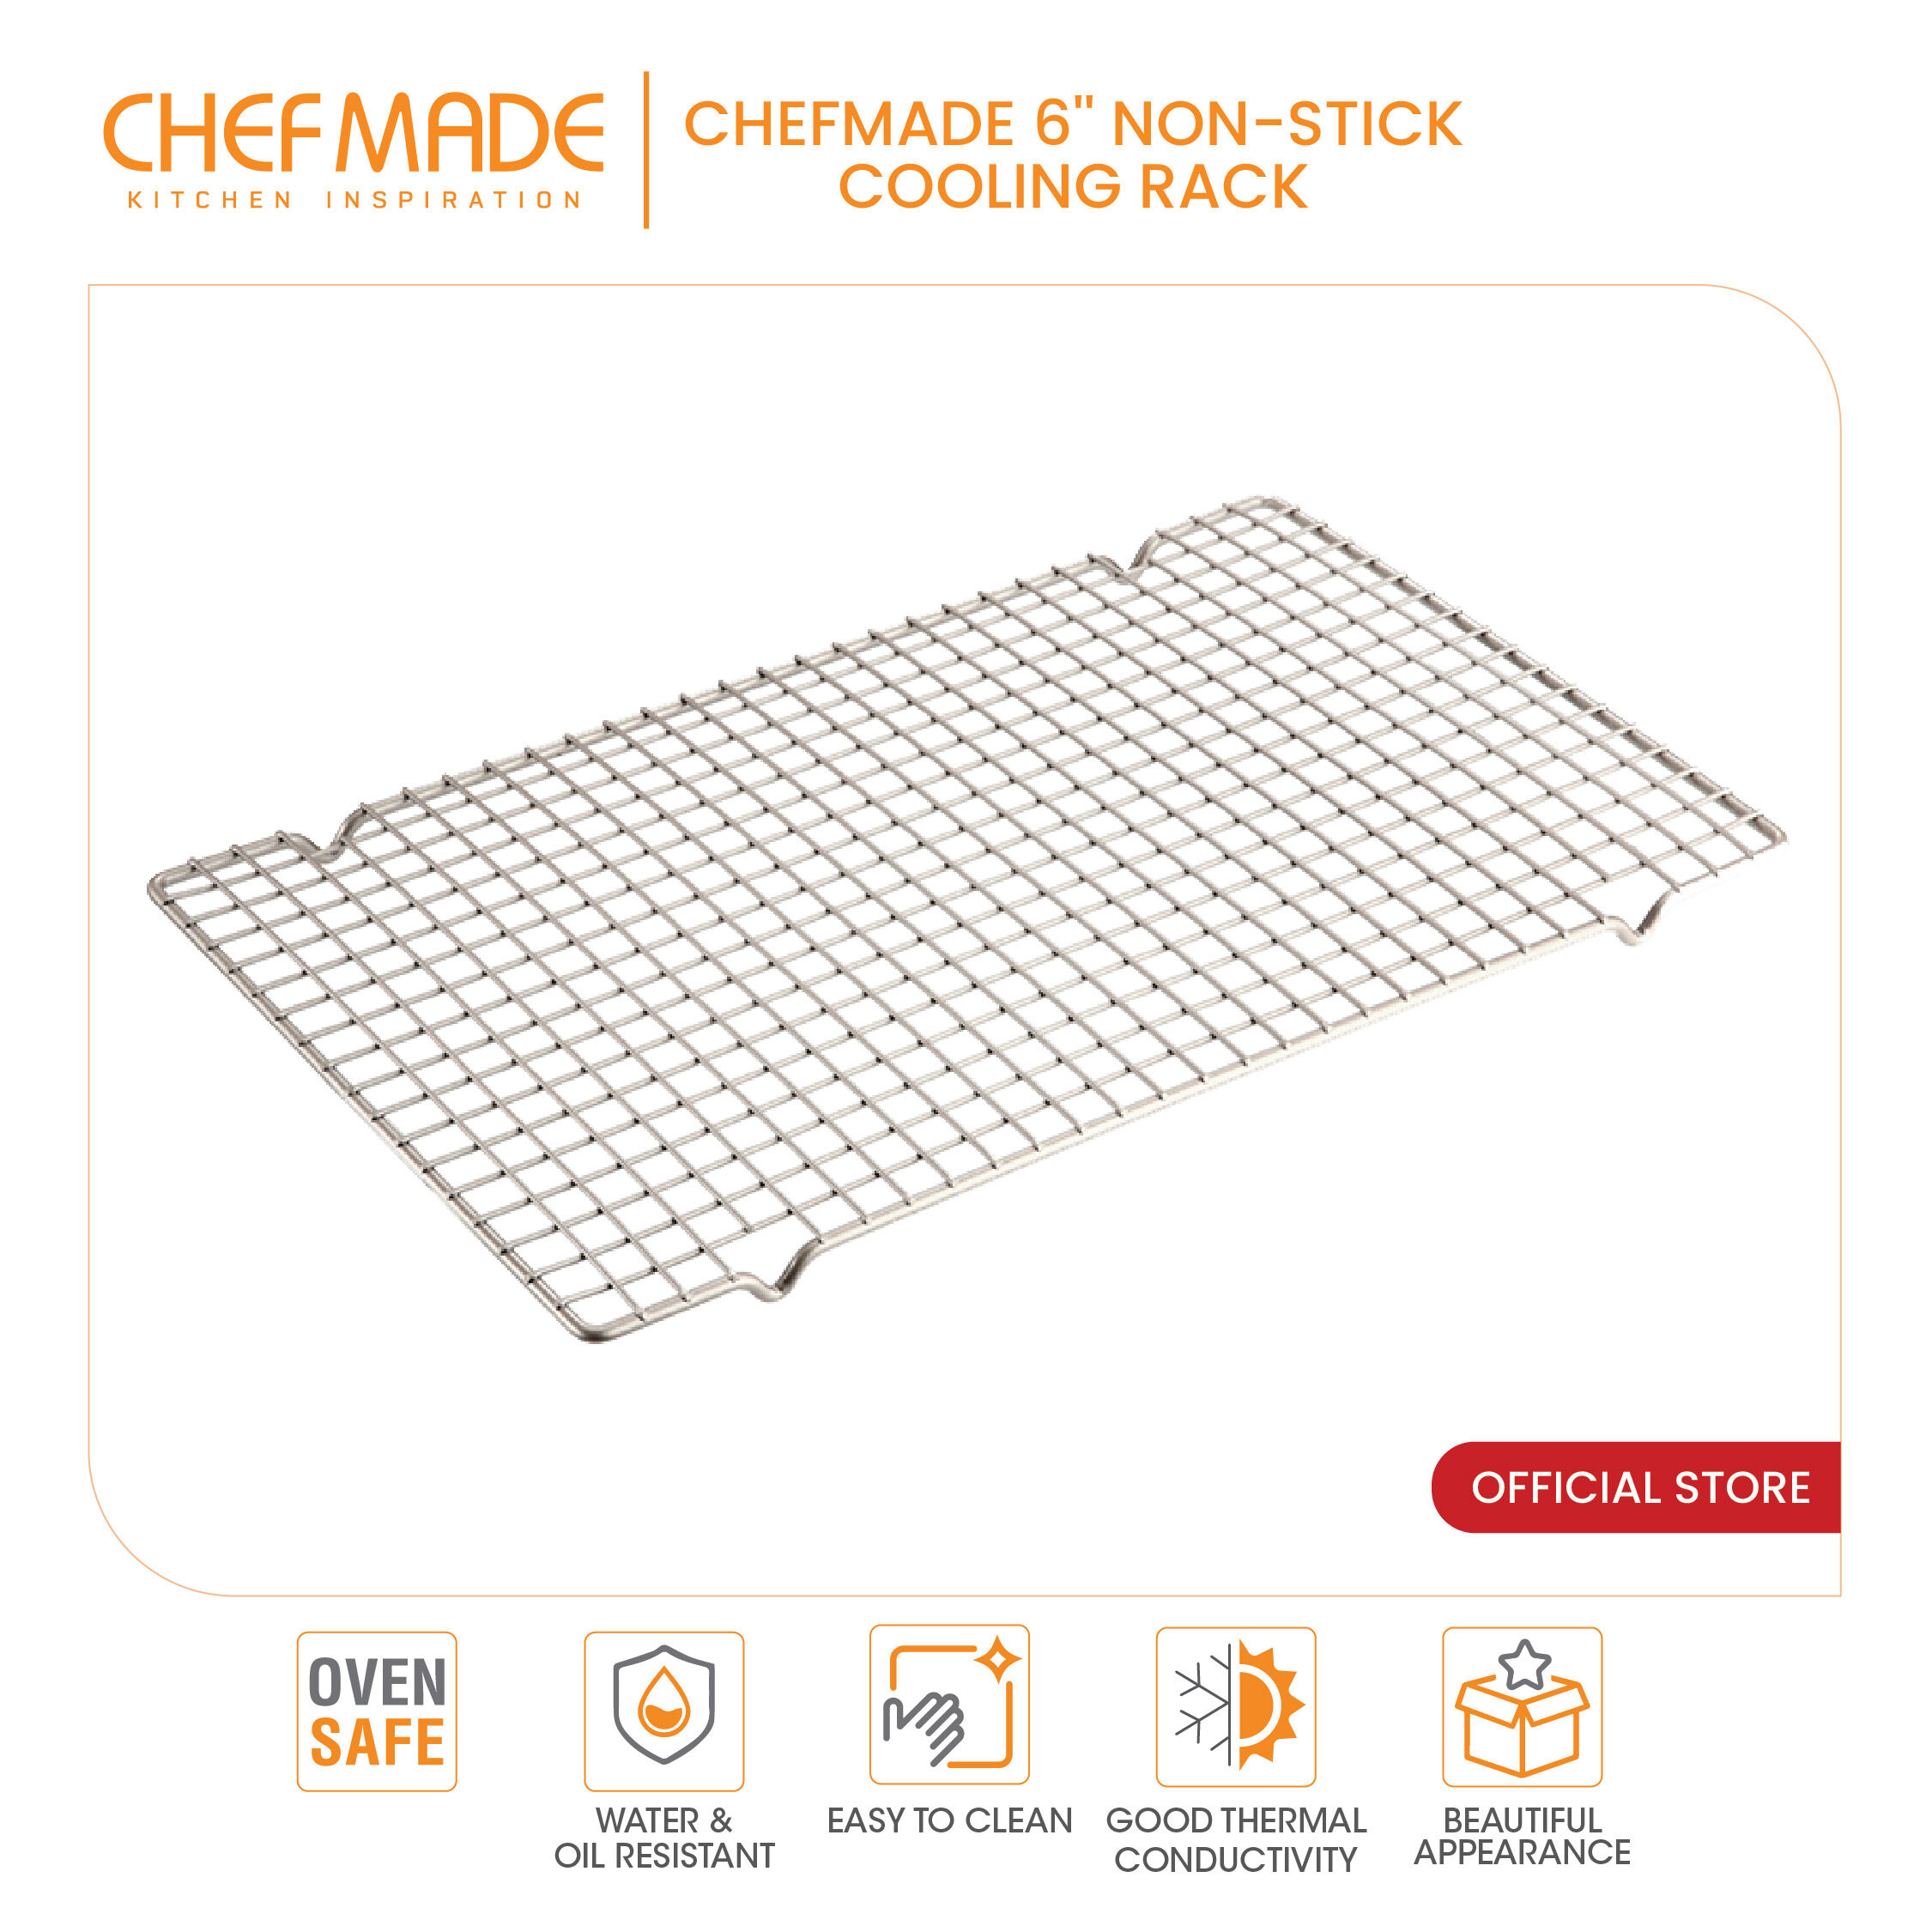 [OASIS SWISS] CHEFMADE 16'' NON-STICK COOLING RACK - WK3004